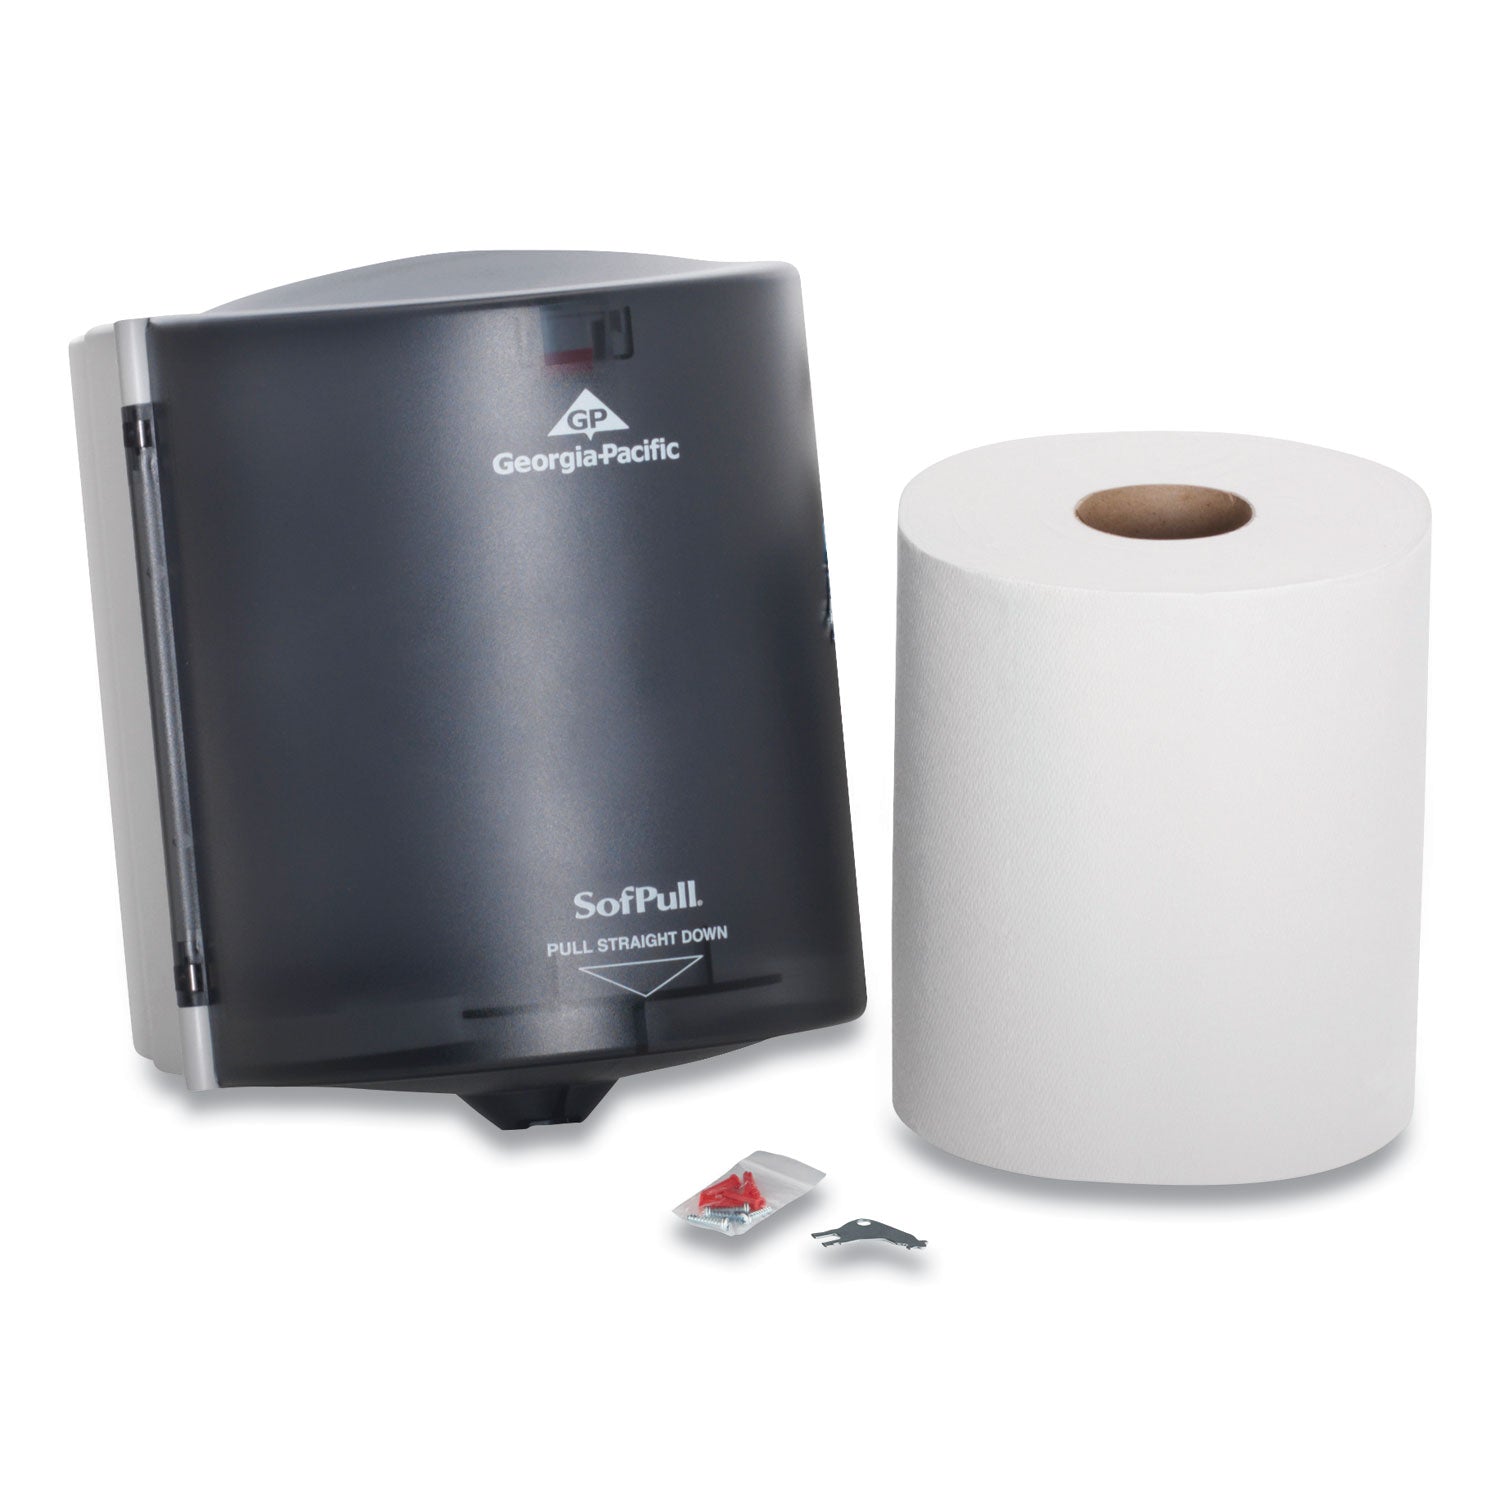 sofpull-center-pull-hand-towel-dispenser-includes-roll-of-320-centerpull-towels-956-x-938-x-1206-gray_gpc58206 - 2